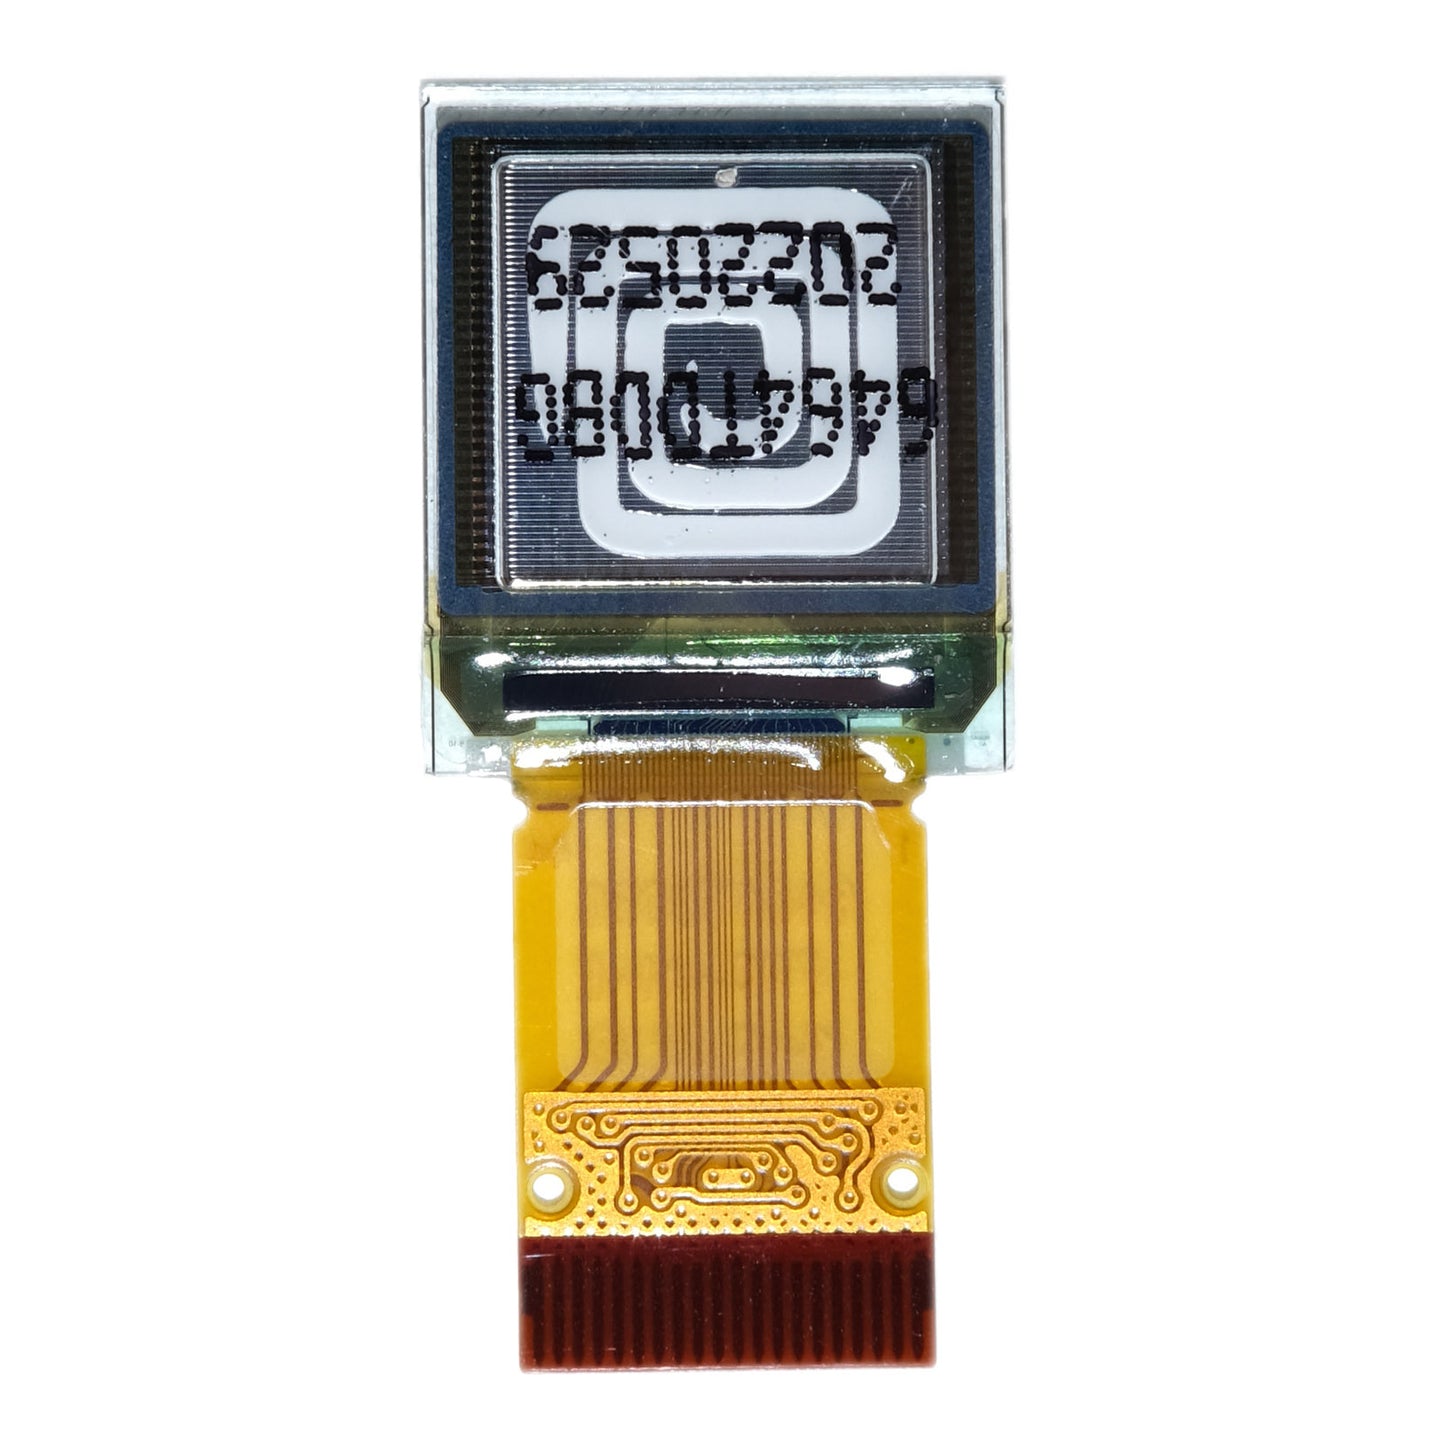 Back of 0.66-inch OLED Graphic Display Panel with 64x64 resolution